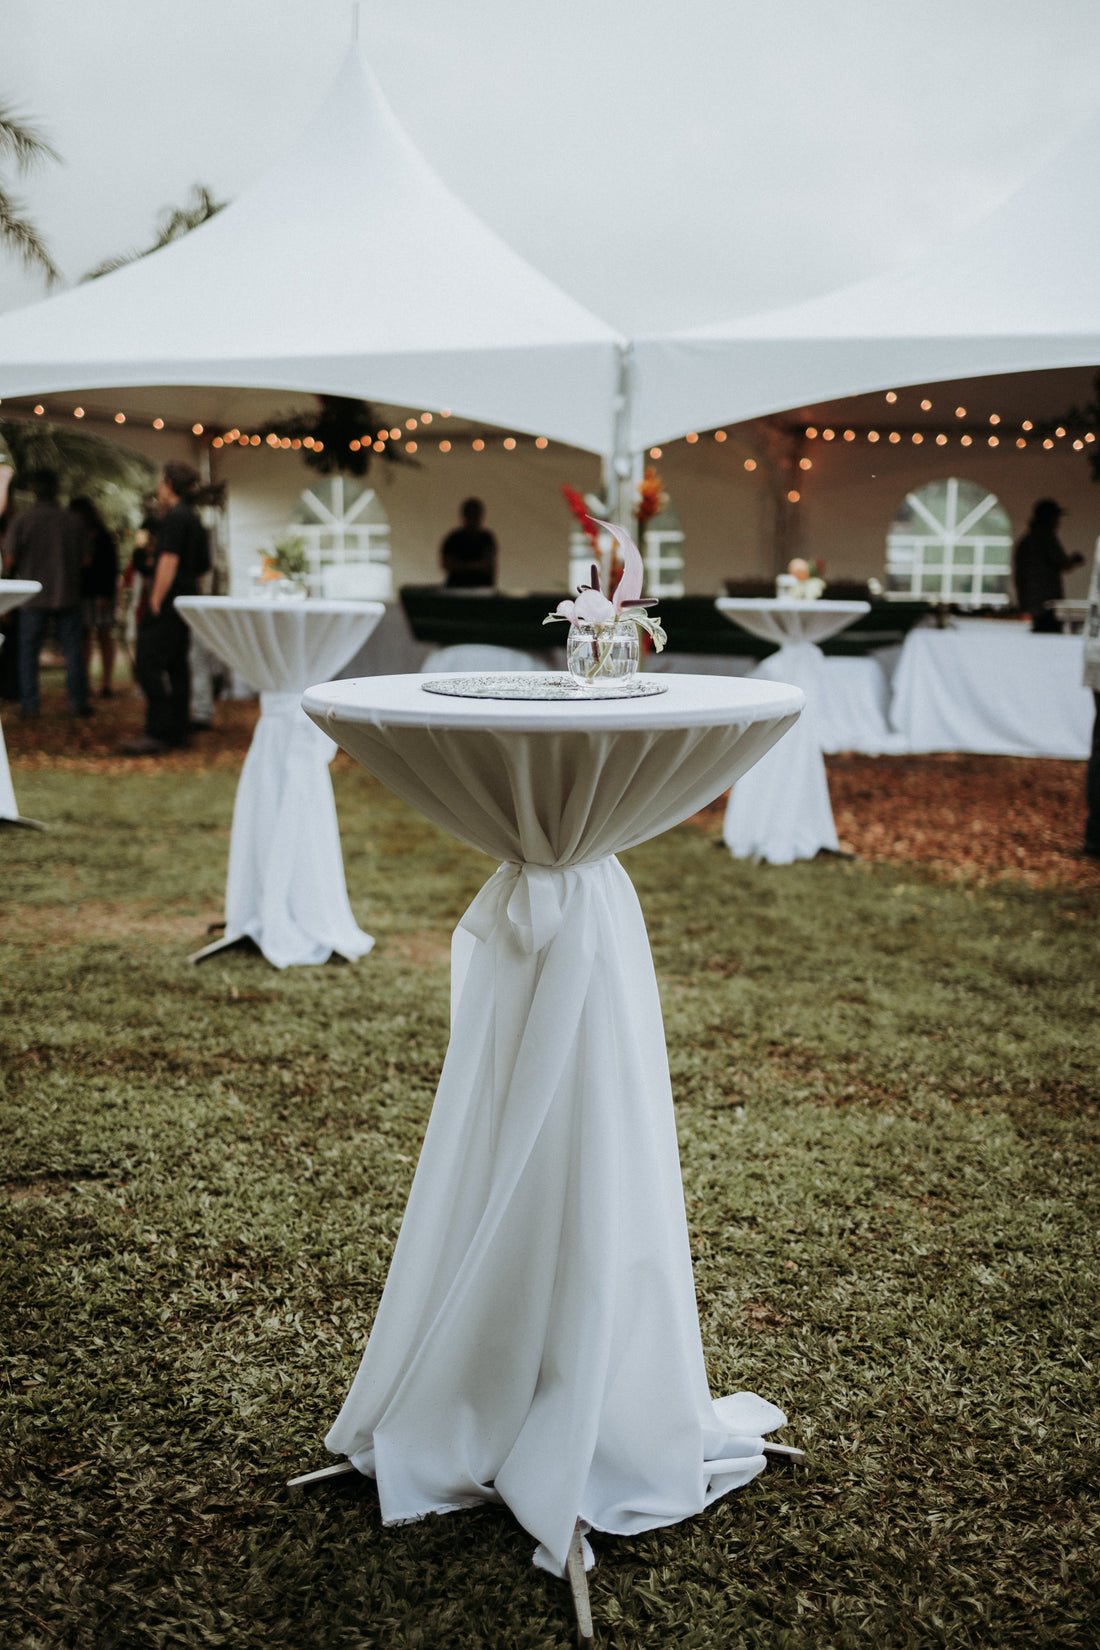 wedding tent in the background and cocktail tables draped in white linens